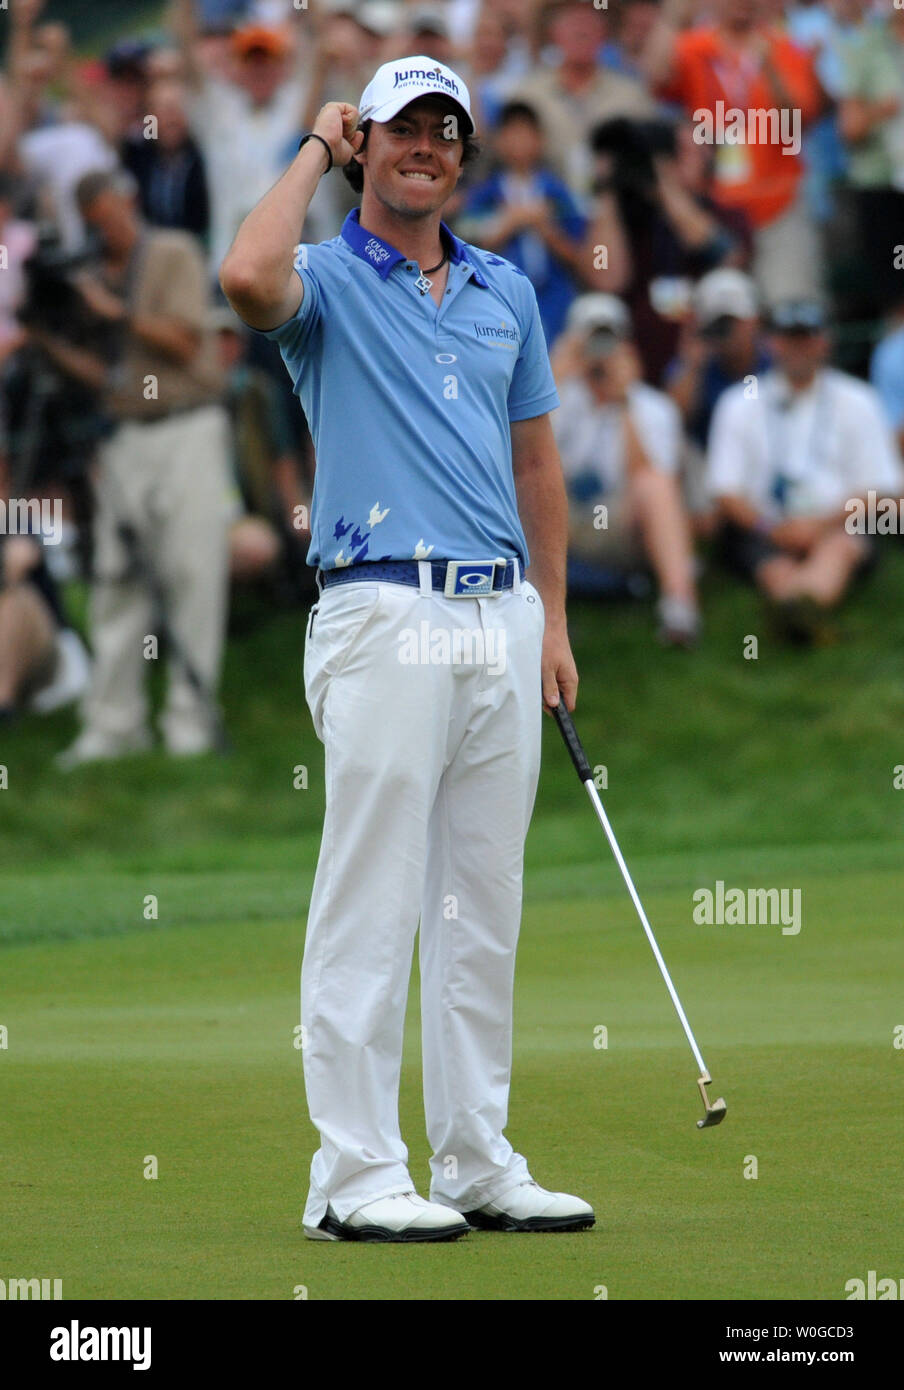 Northern Ireland's Rory McIlroy smiles and jubilates after making his final putt and winning the 2011 U.S. Open golf championship at Congressional Country Club in Bethesda, Maryland on June 19, 2011.  McIlroy set a record in winning with a 16-under-par score.     UPI/Pat Benic Stock Photo